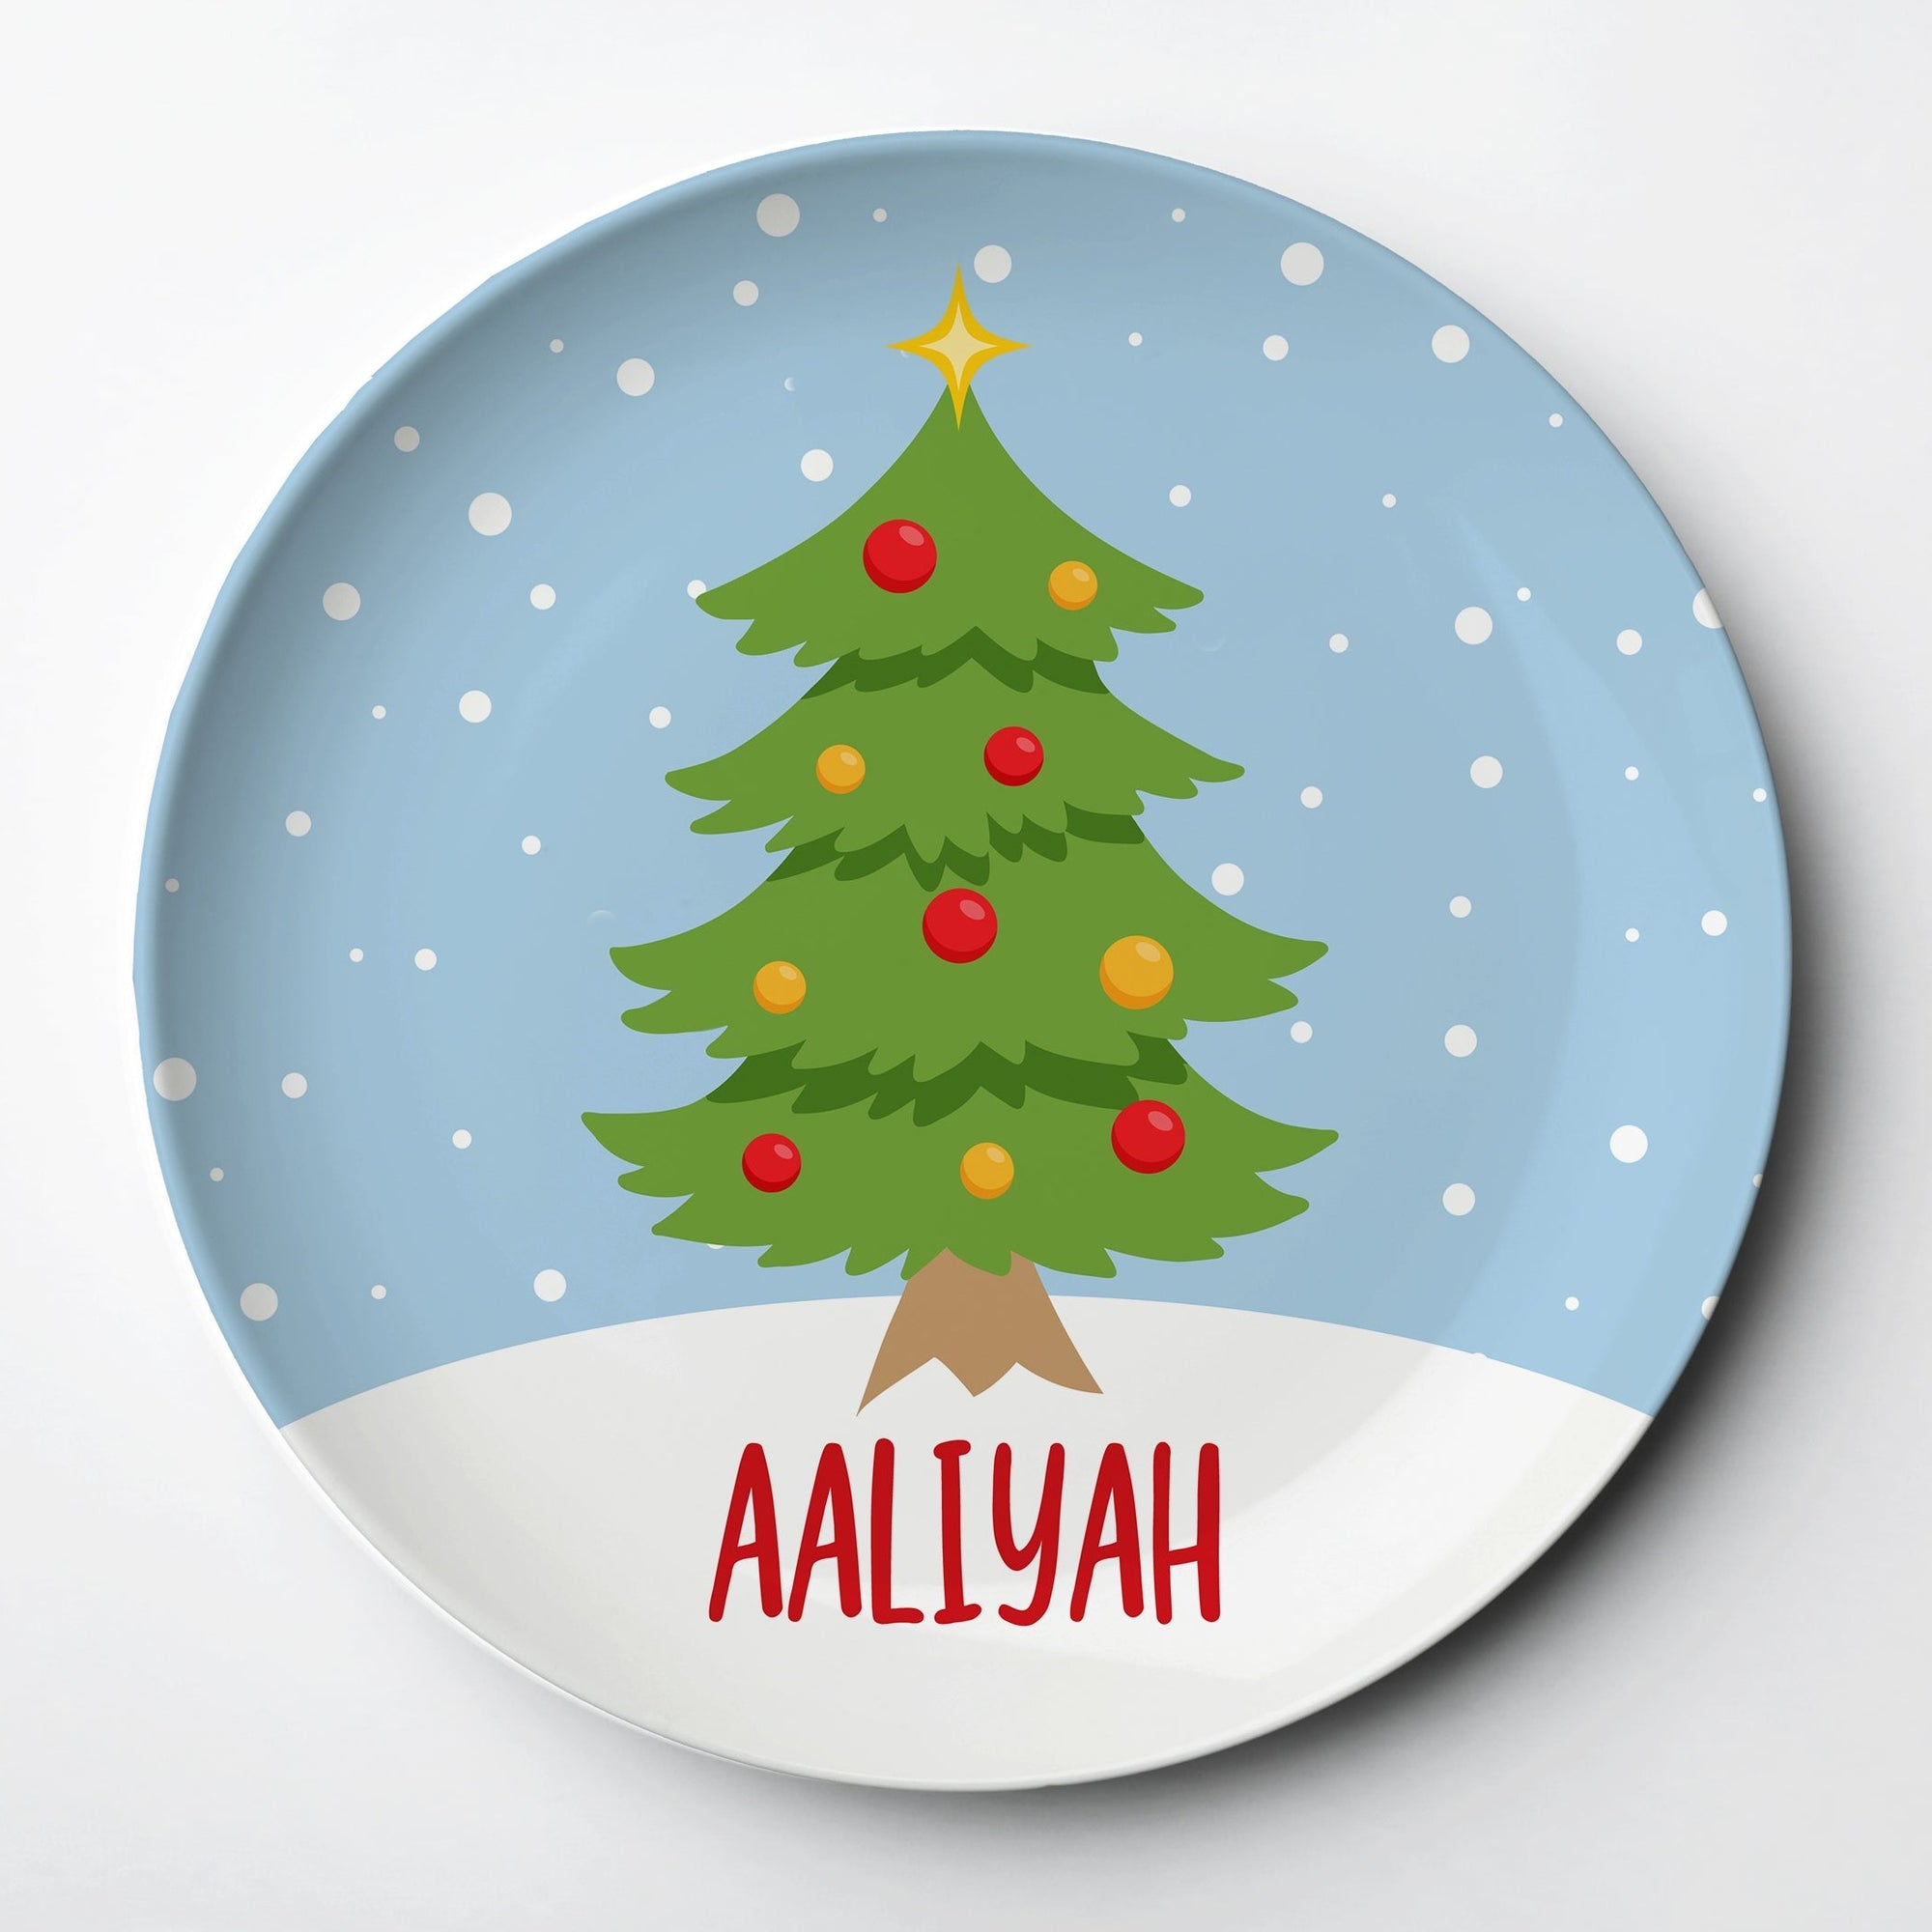 Christmas Tree Personalized Kids Plate, Will last for years and is a great keepsake gift. Microwave and Dishwasher save. Made in the USA